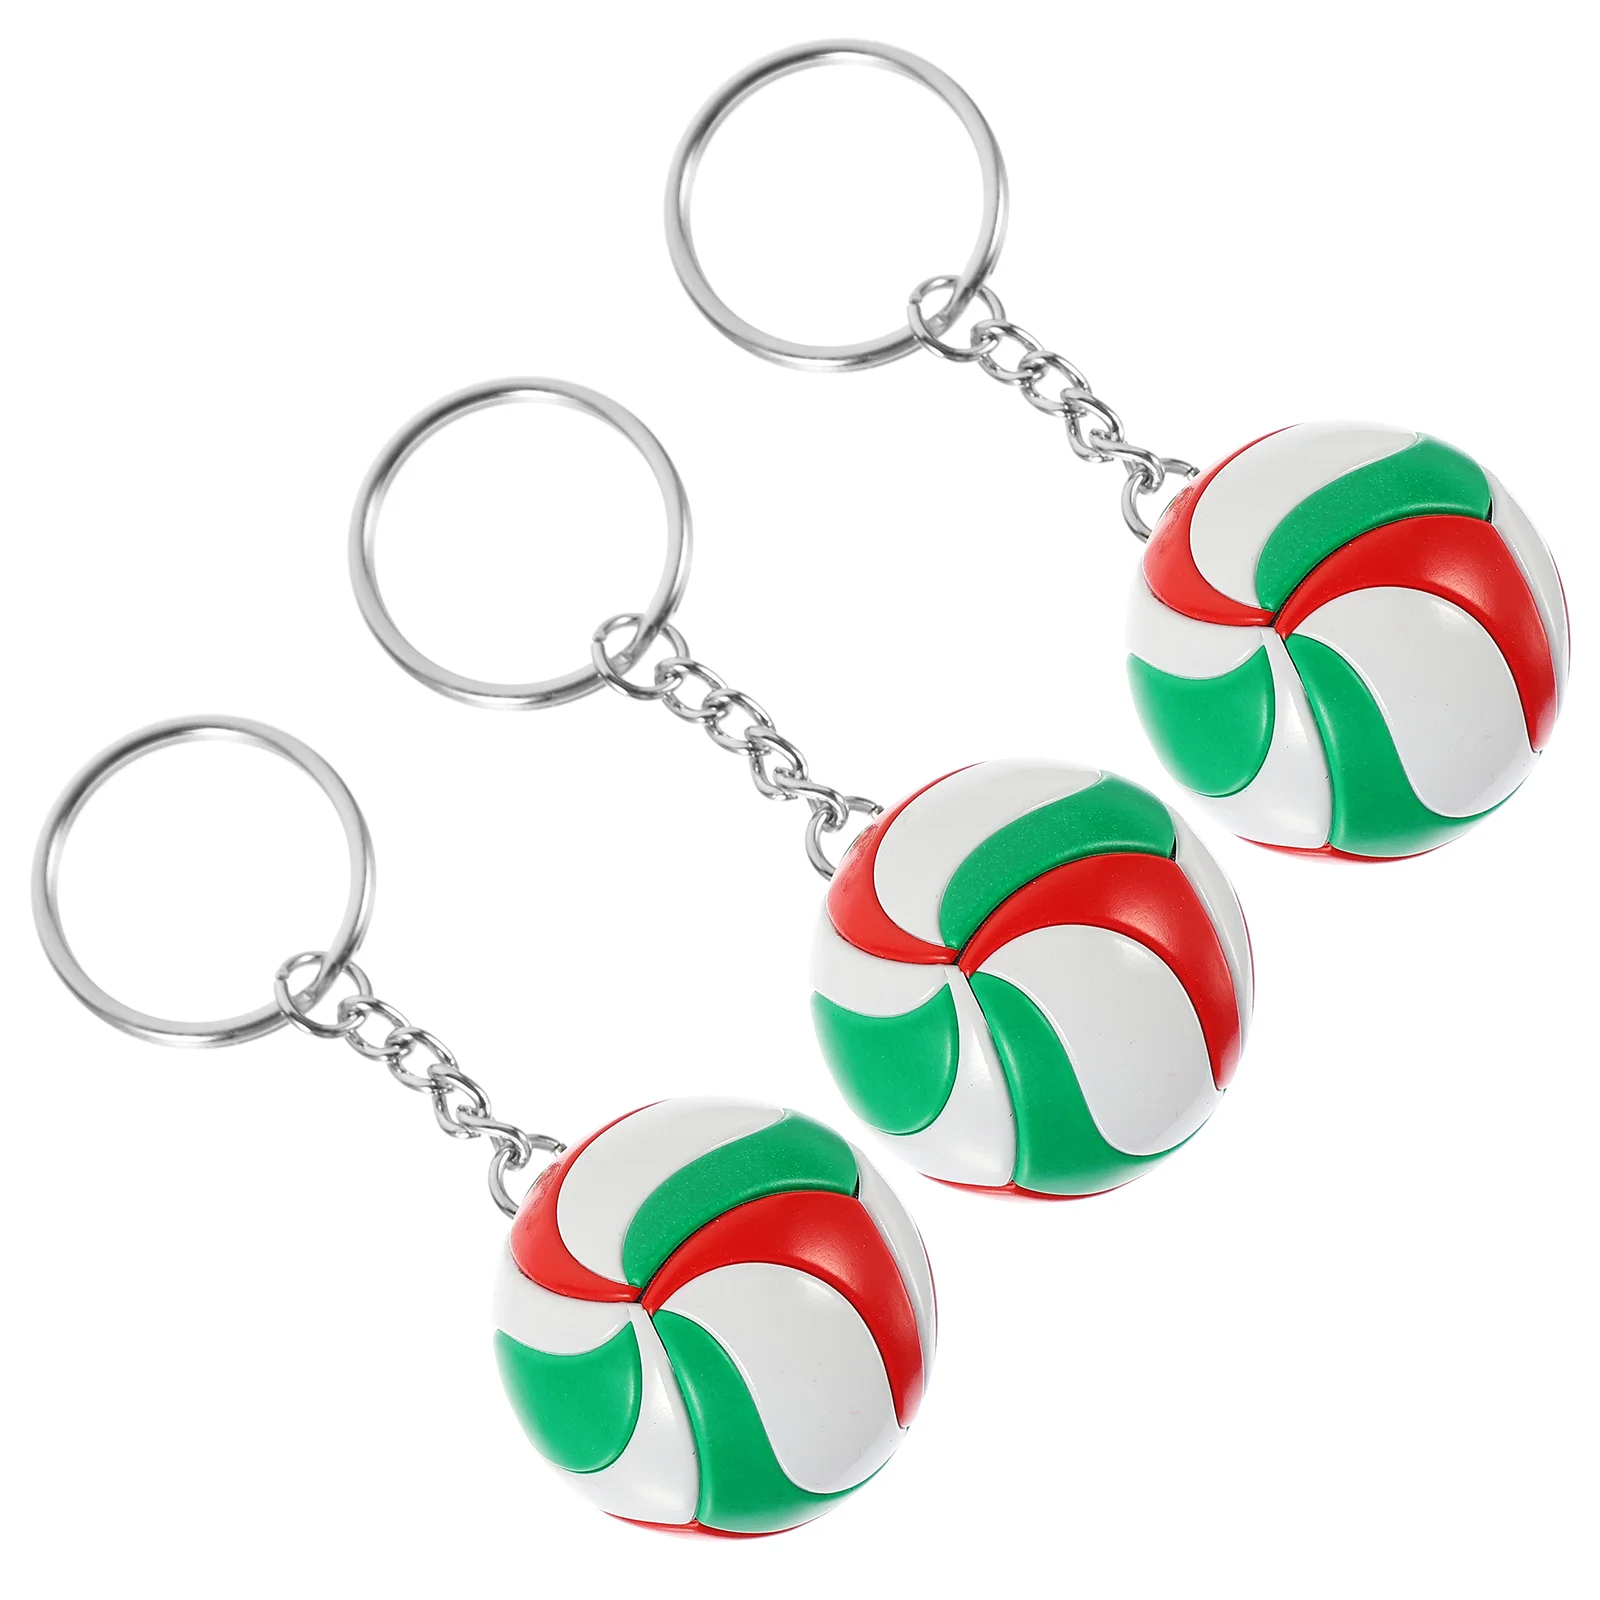 

3 Pcs Volleyball Model Toy Accessory Gifts Soccer Keychain Bulk Decoration Adorable Exquisite Portable